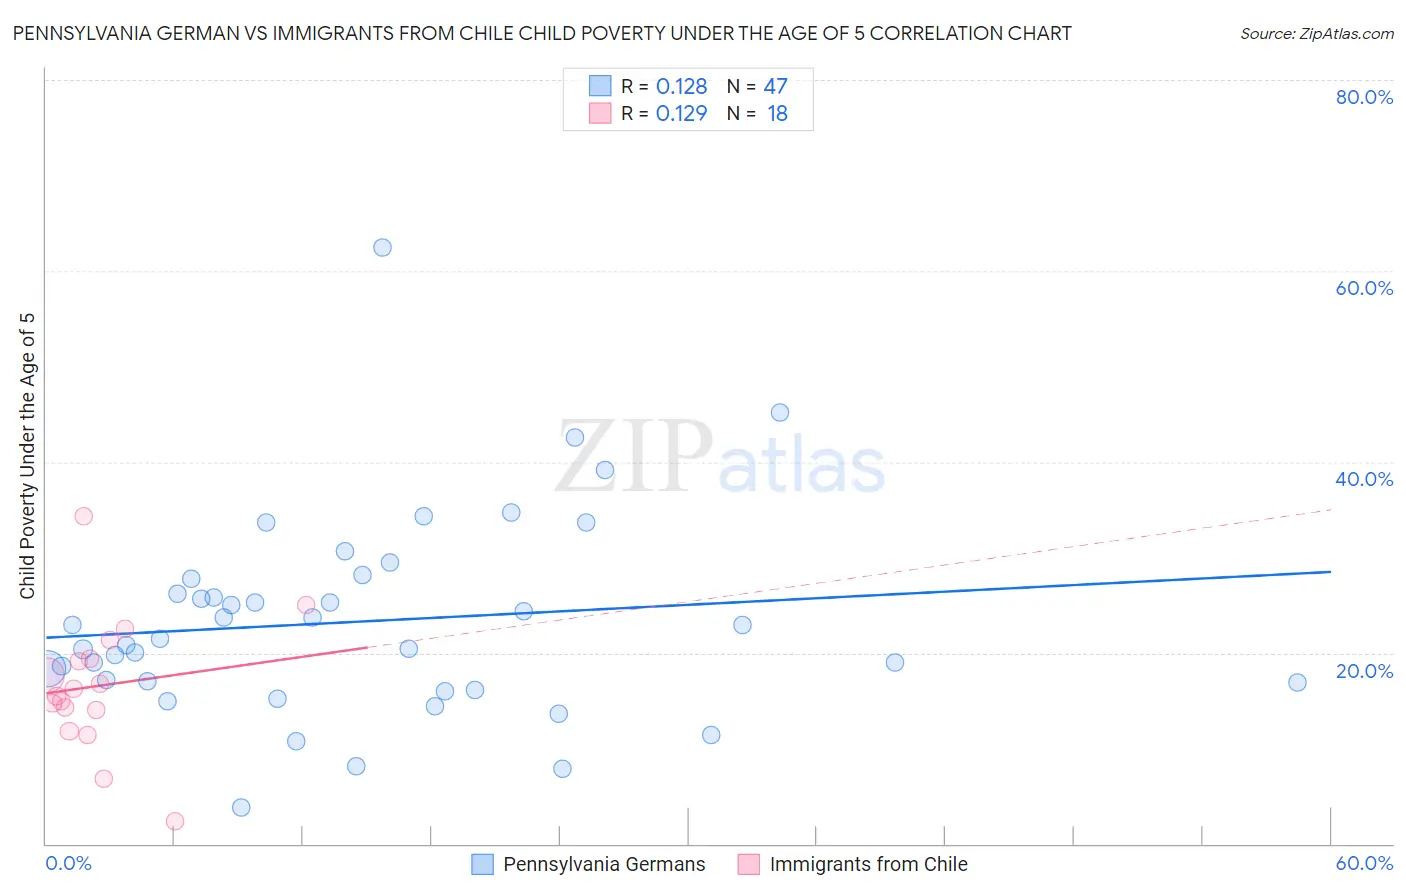 Pennsylvania German vs Immigrants from Chile Child Poverty Under the Age of 5